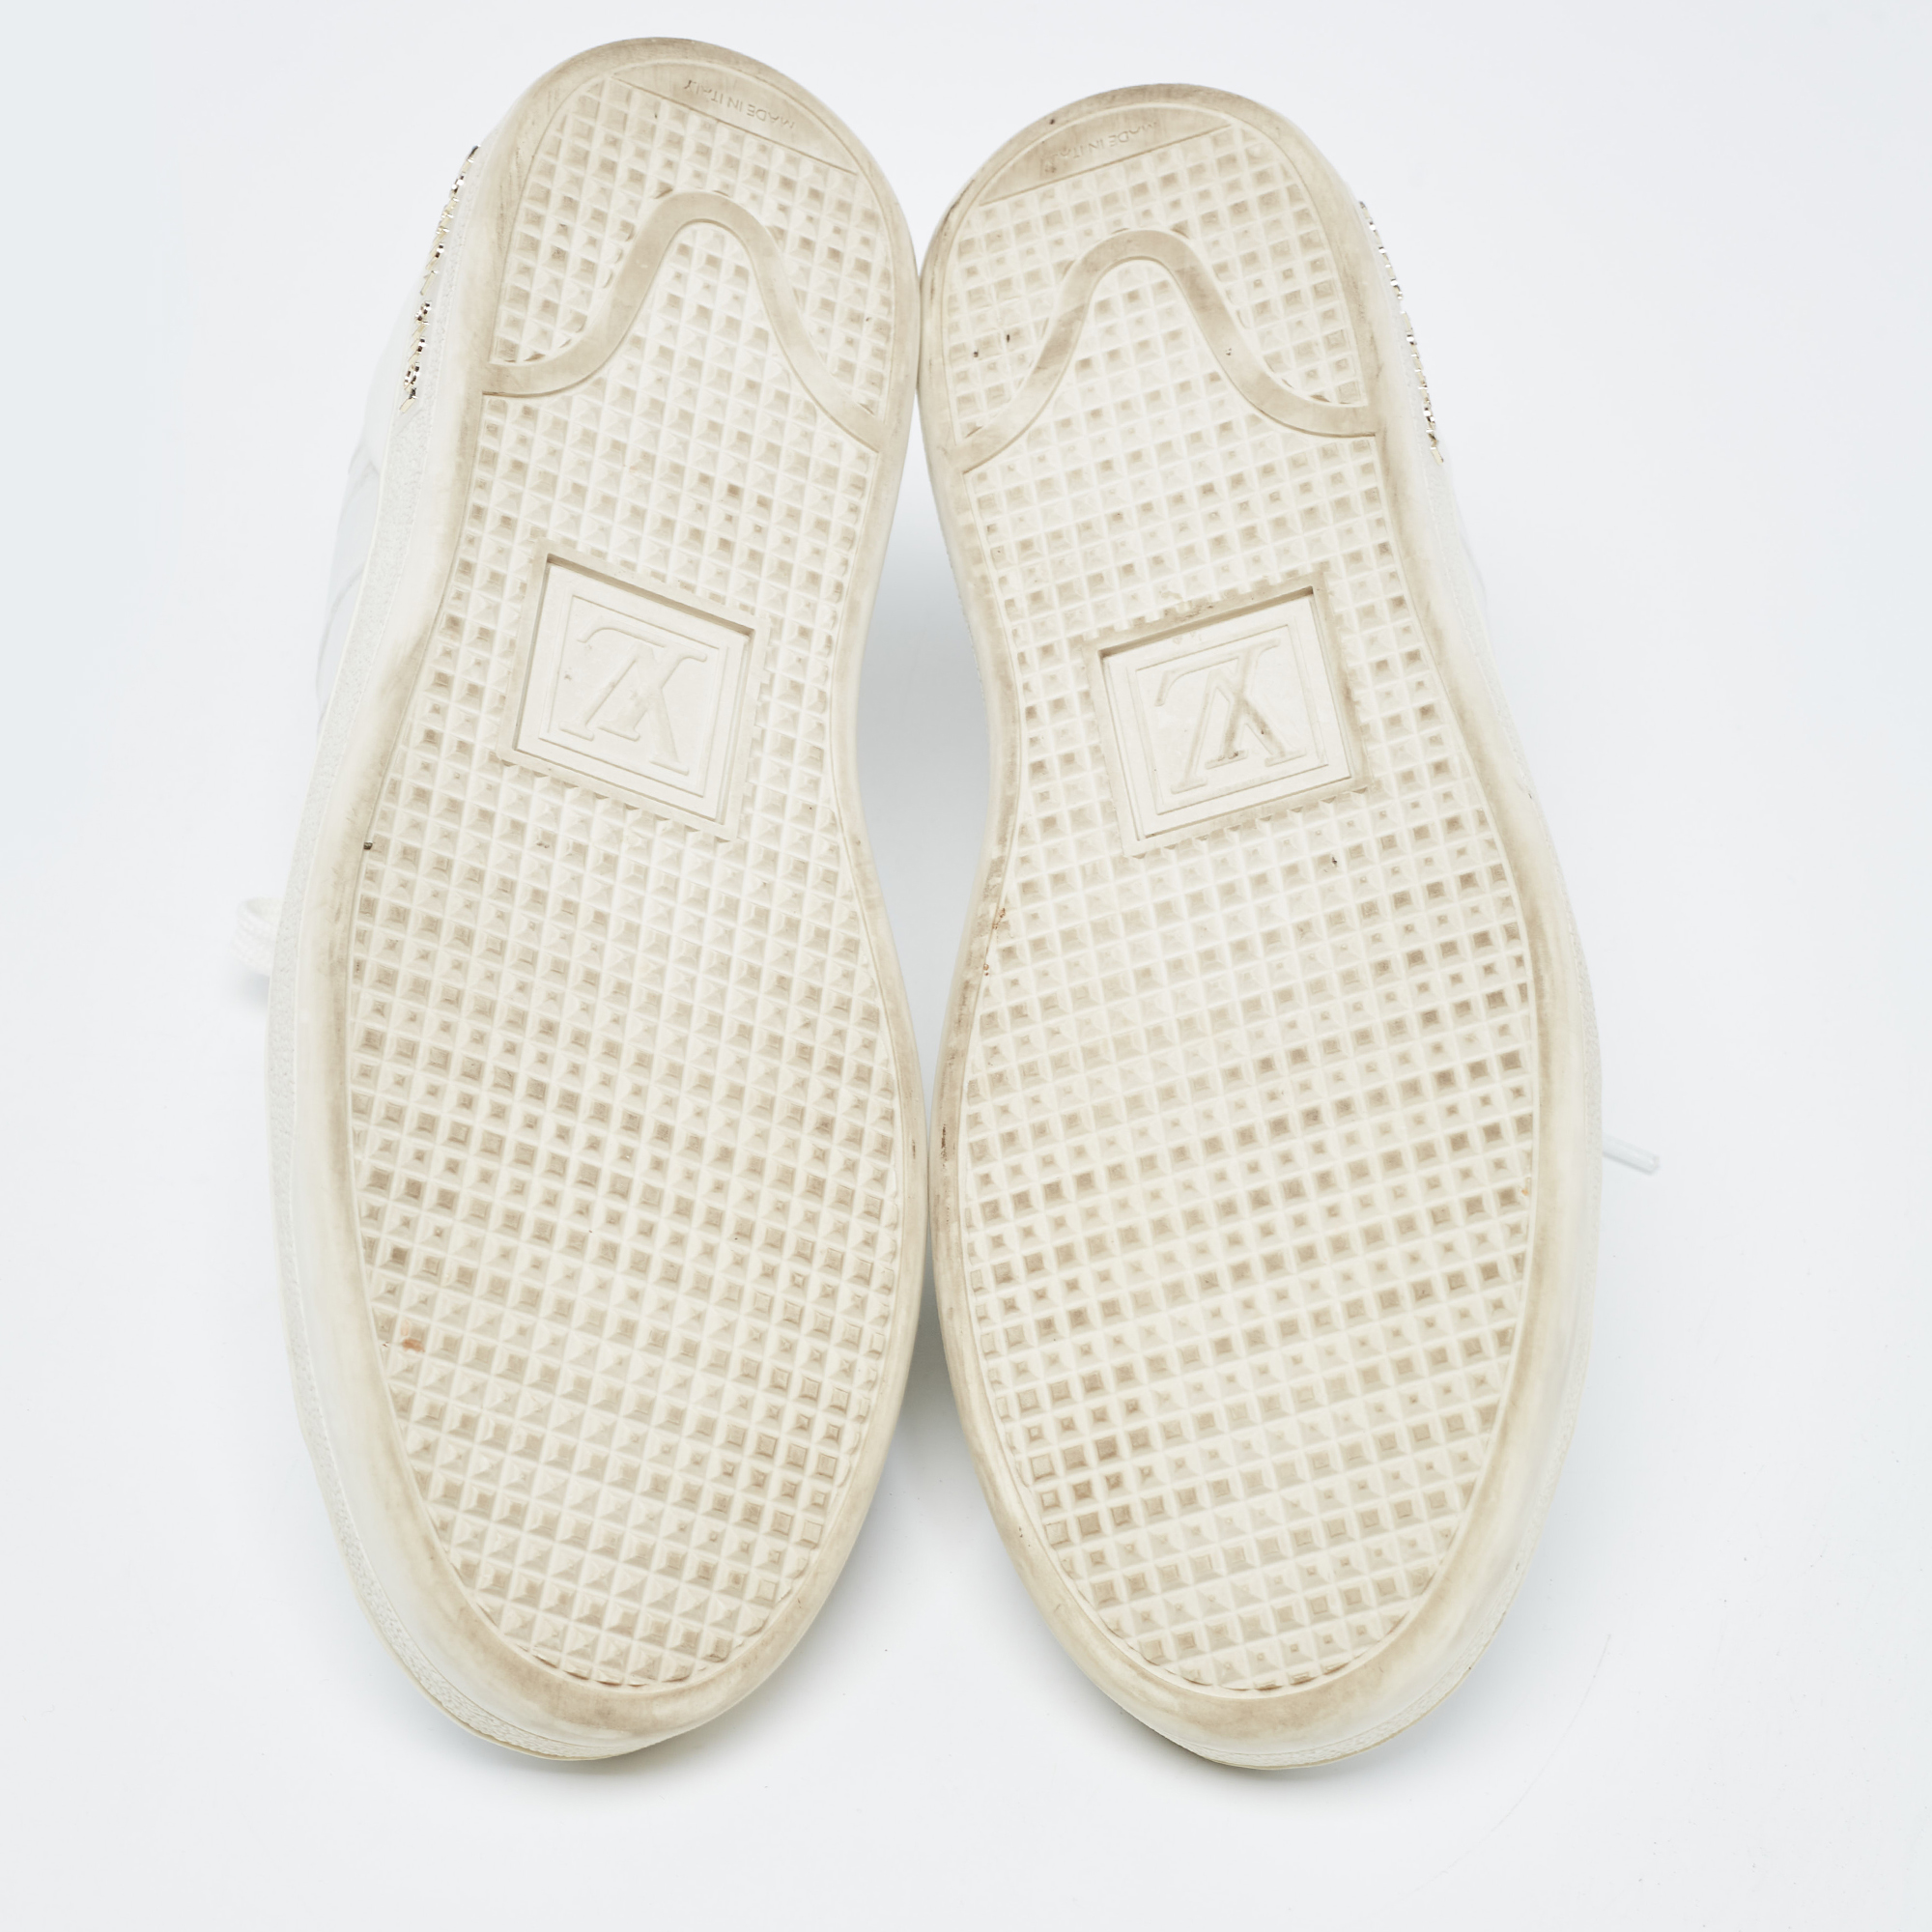 Louis Vuitton White Croc Embossed Leather Frontrow Sneakers Size 36.5